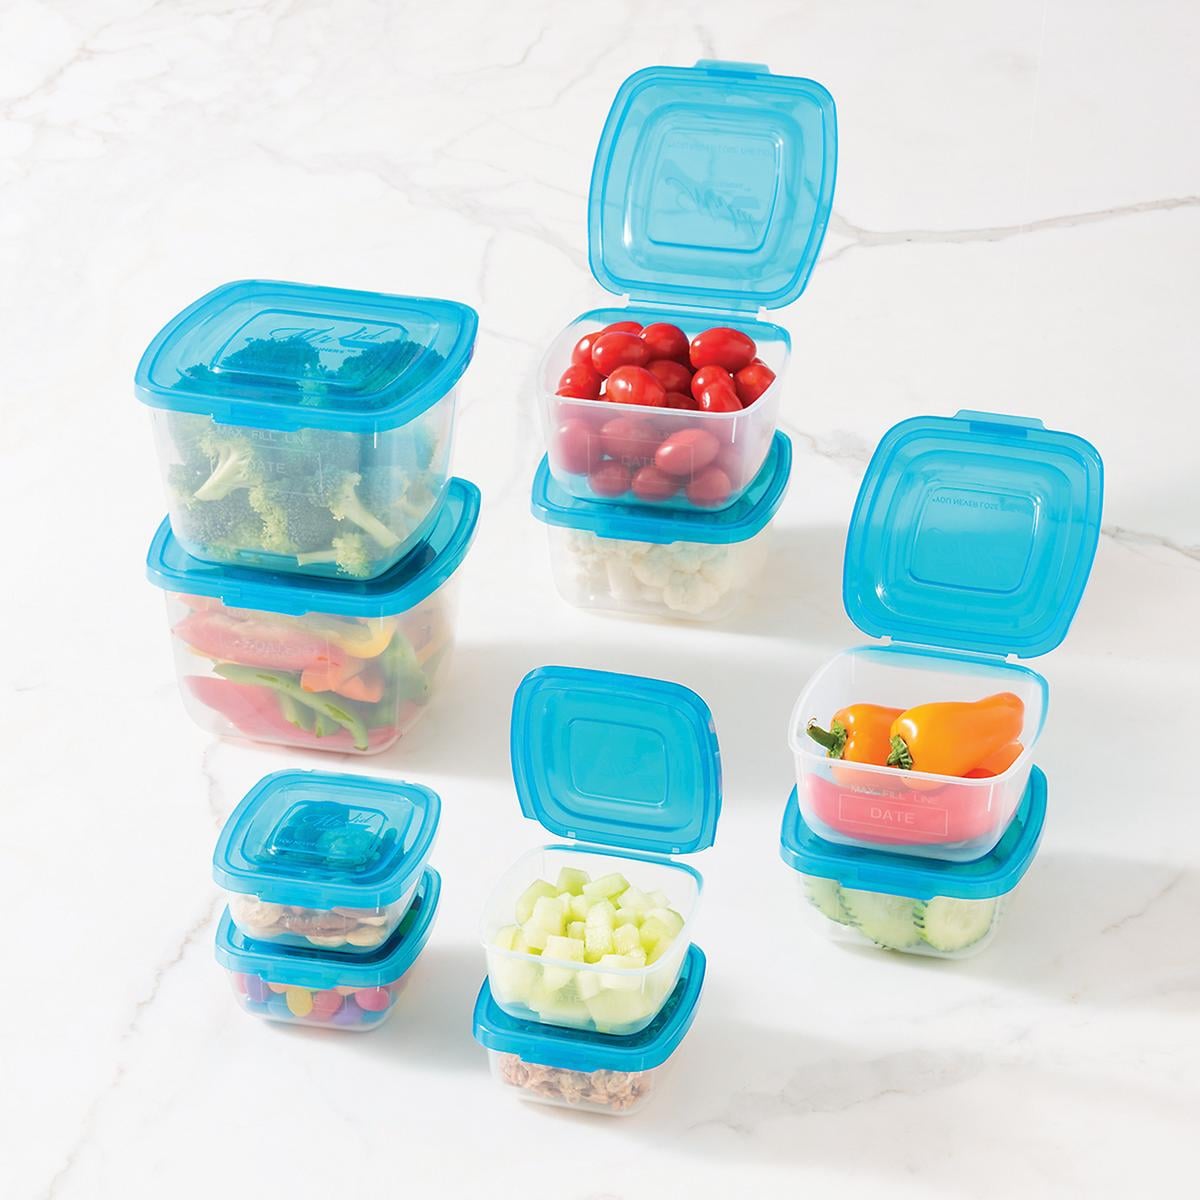 Mr. Lid Food Storage Set of 10  21 Food Storage Containers That